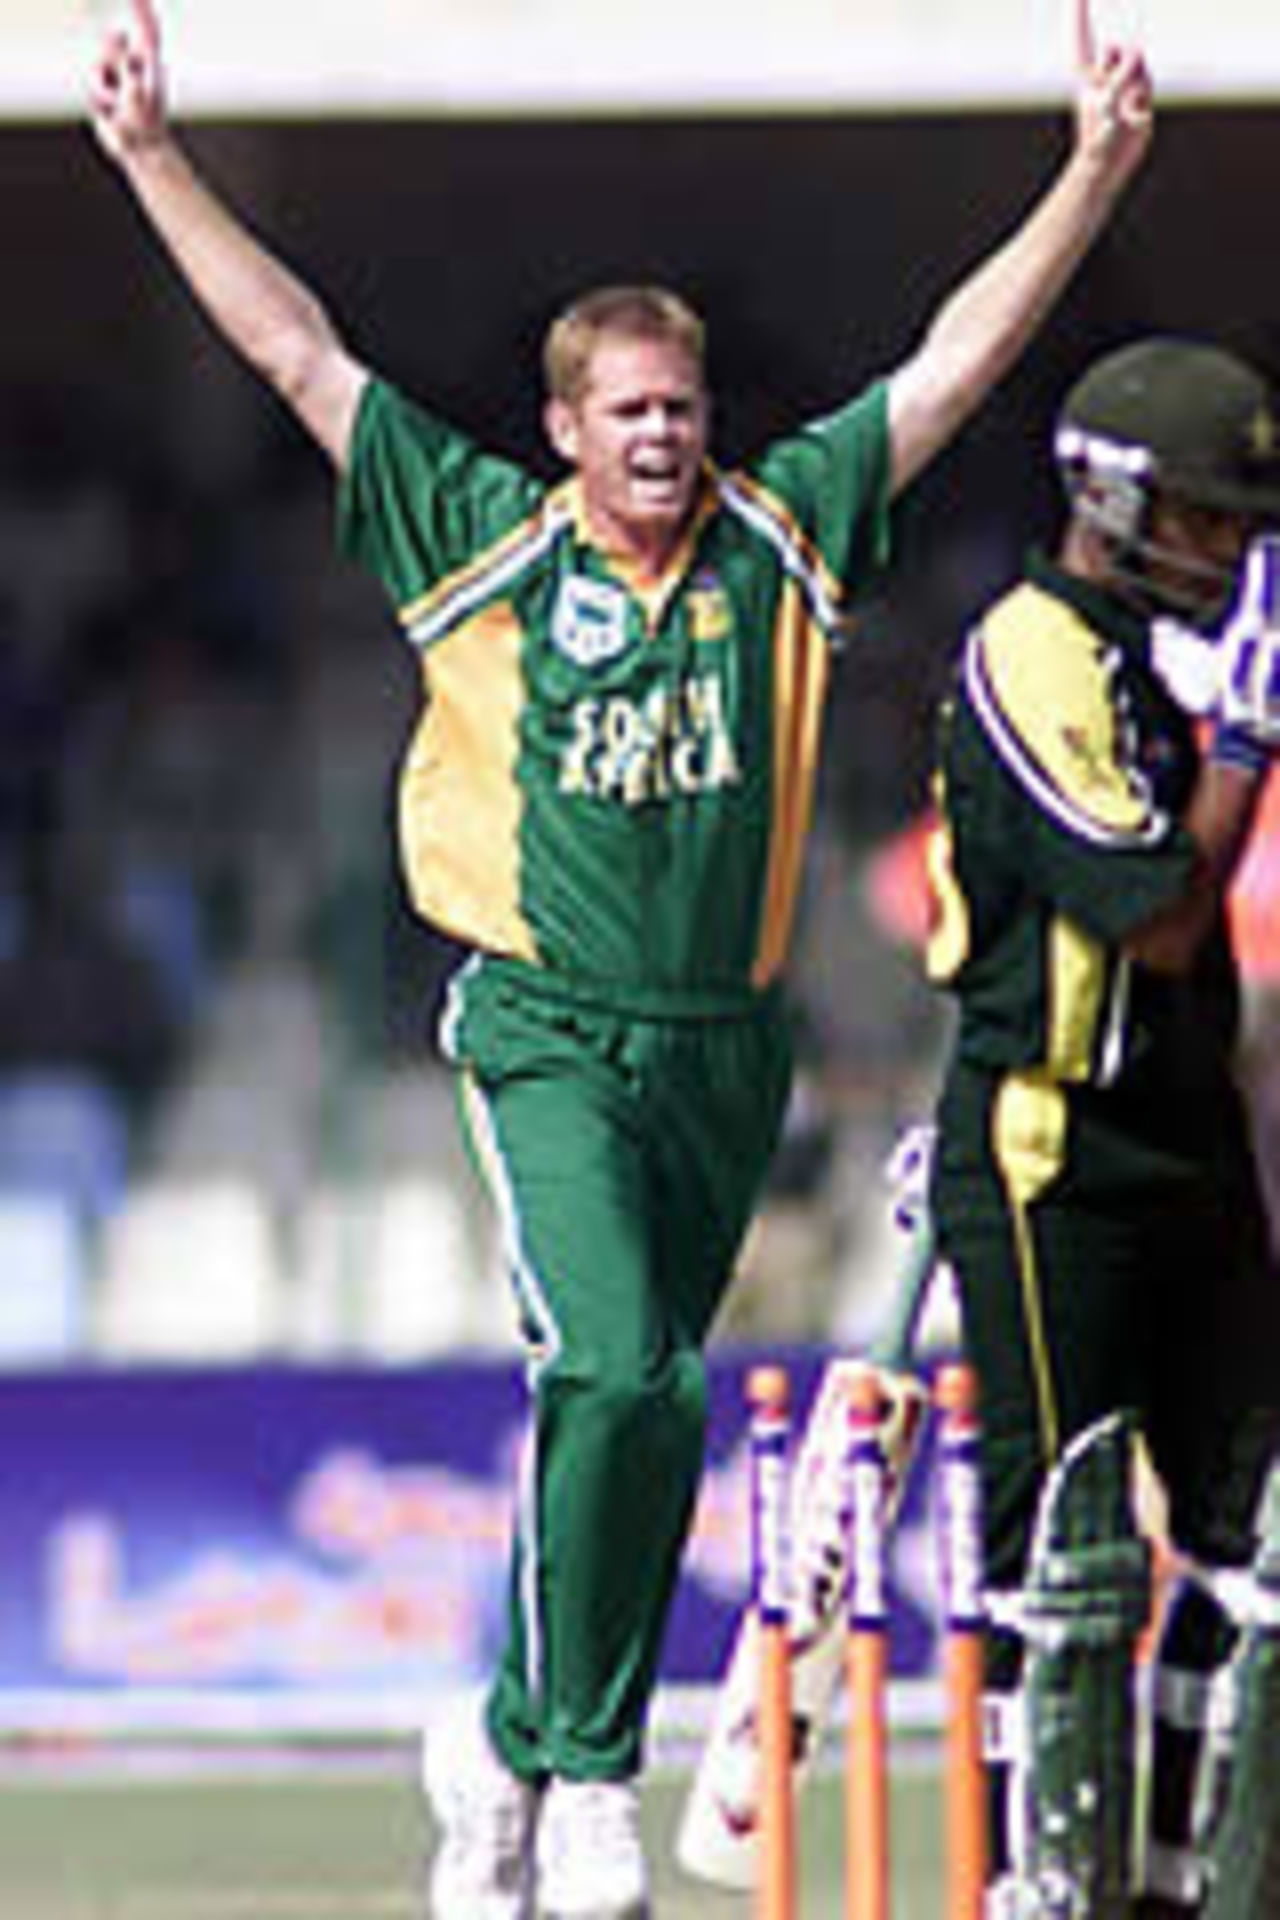 Shaun Pollock celebrates his only wicket, Lahore, ODI2, Pakistan v South Africa, October 5, 2003.